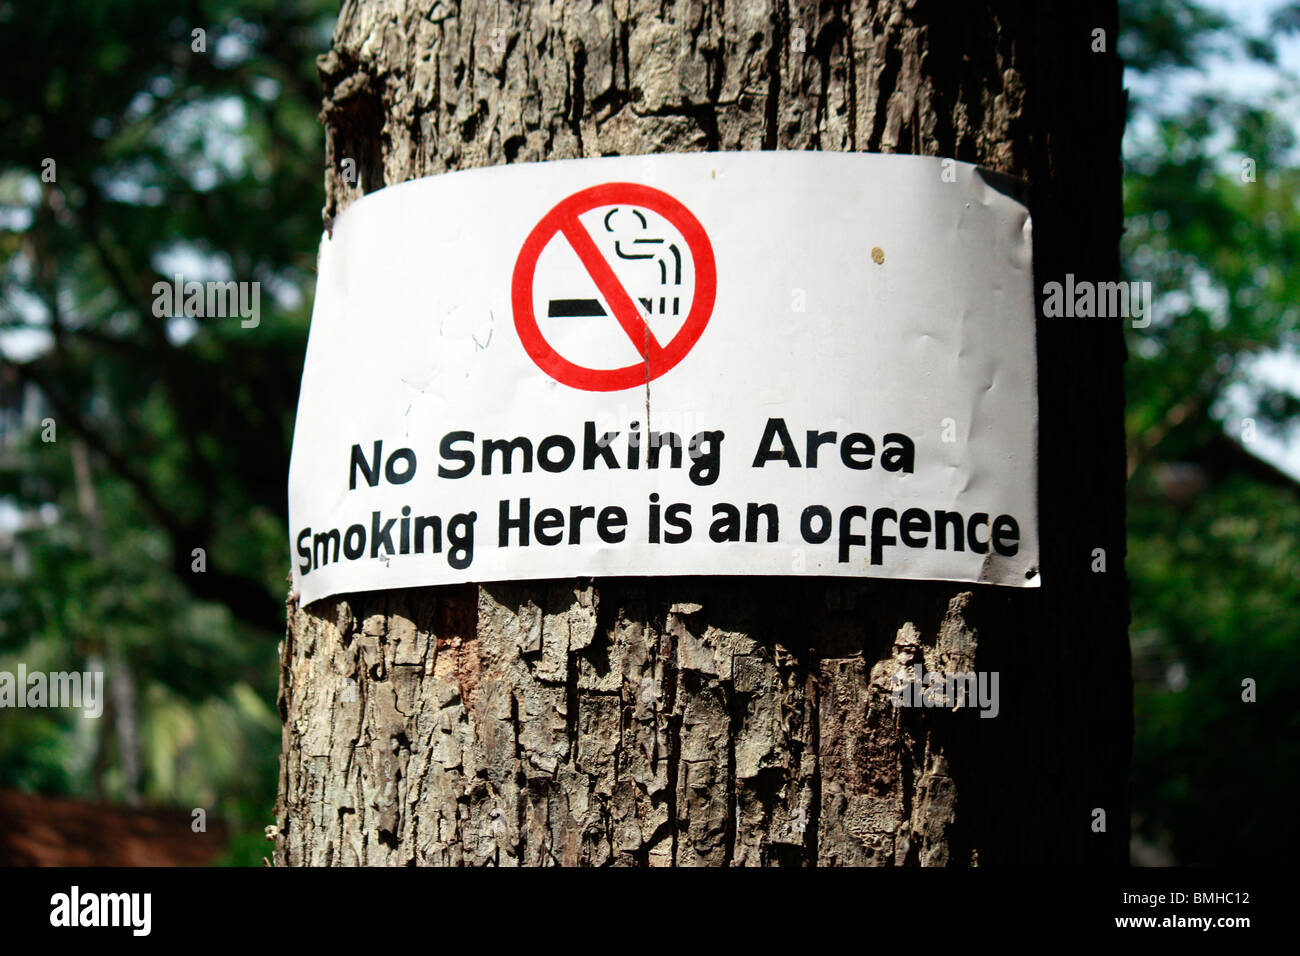 No smoking board sign hung on a tree trunk Stock Photo